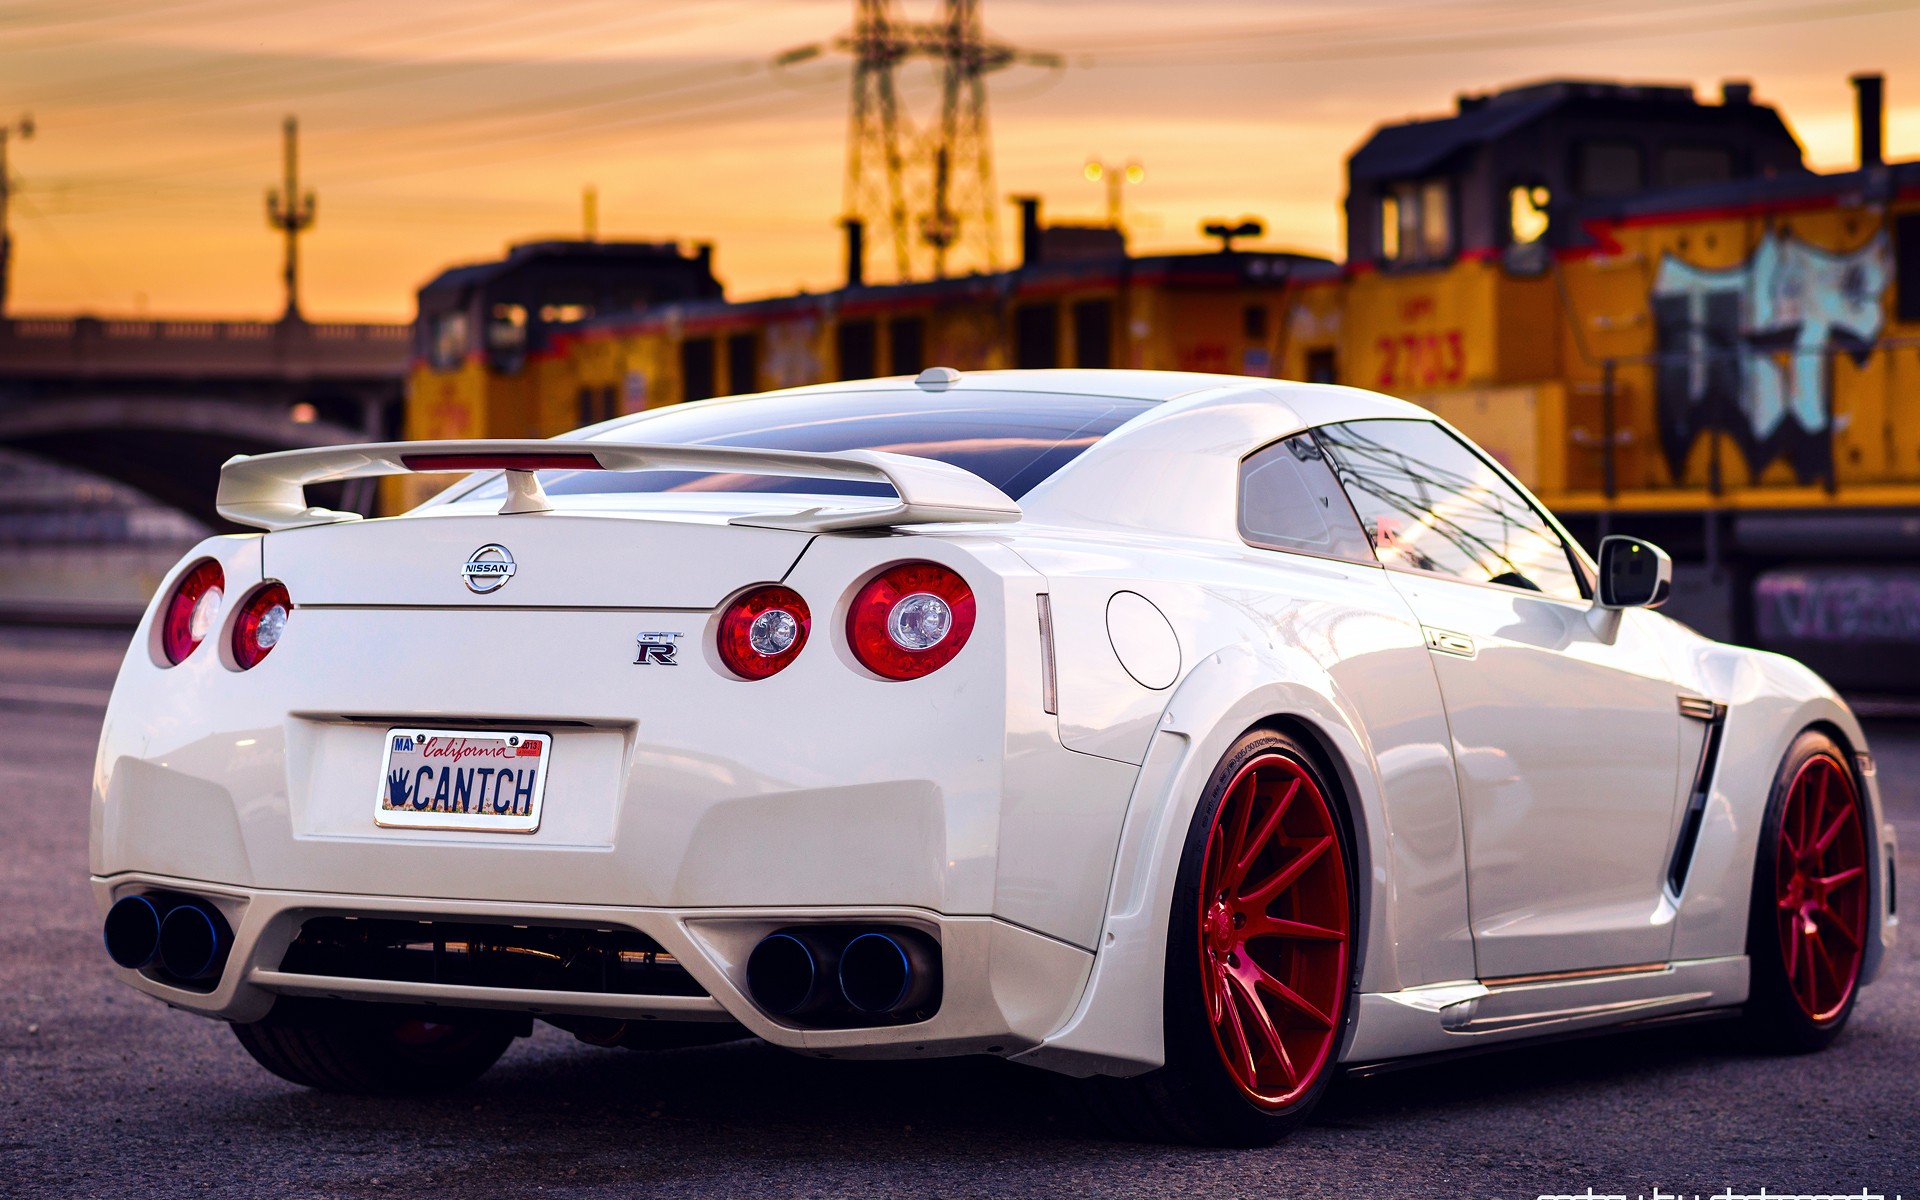 nissan, Gt r, White, Back, Red, Wheels, Sky, Sunset, Tuning, Supercar, Supercars Wallpaper